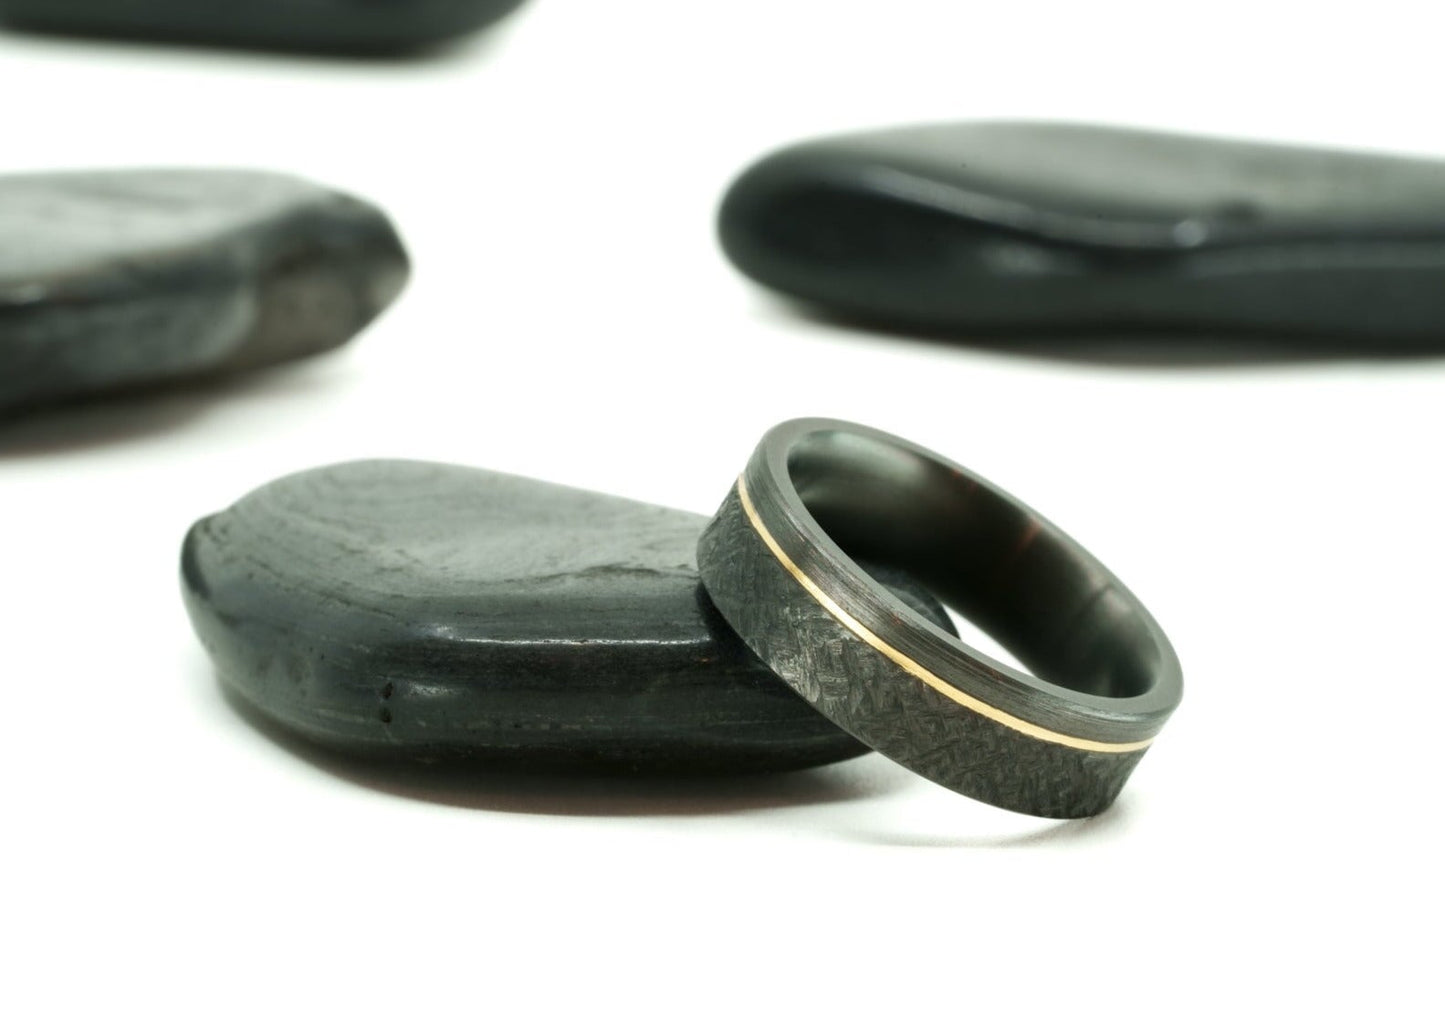 Close-up of the textured etch and brushed finish on the 'Rae' black zirconium ring